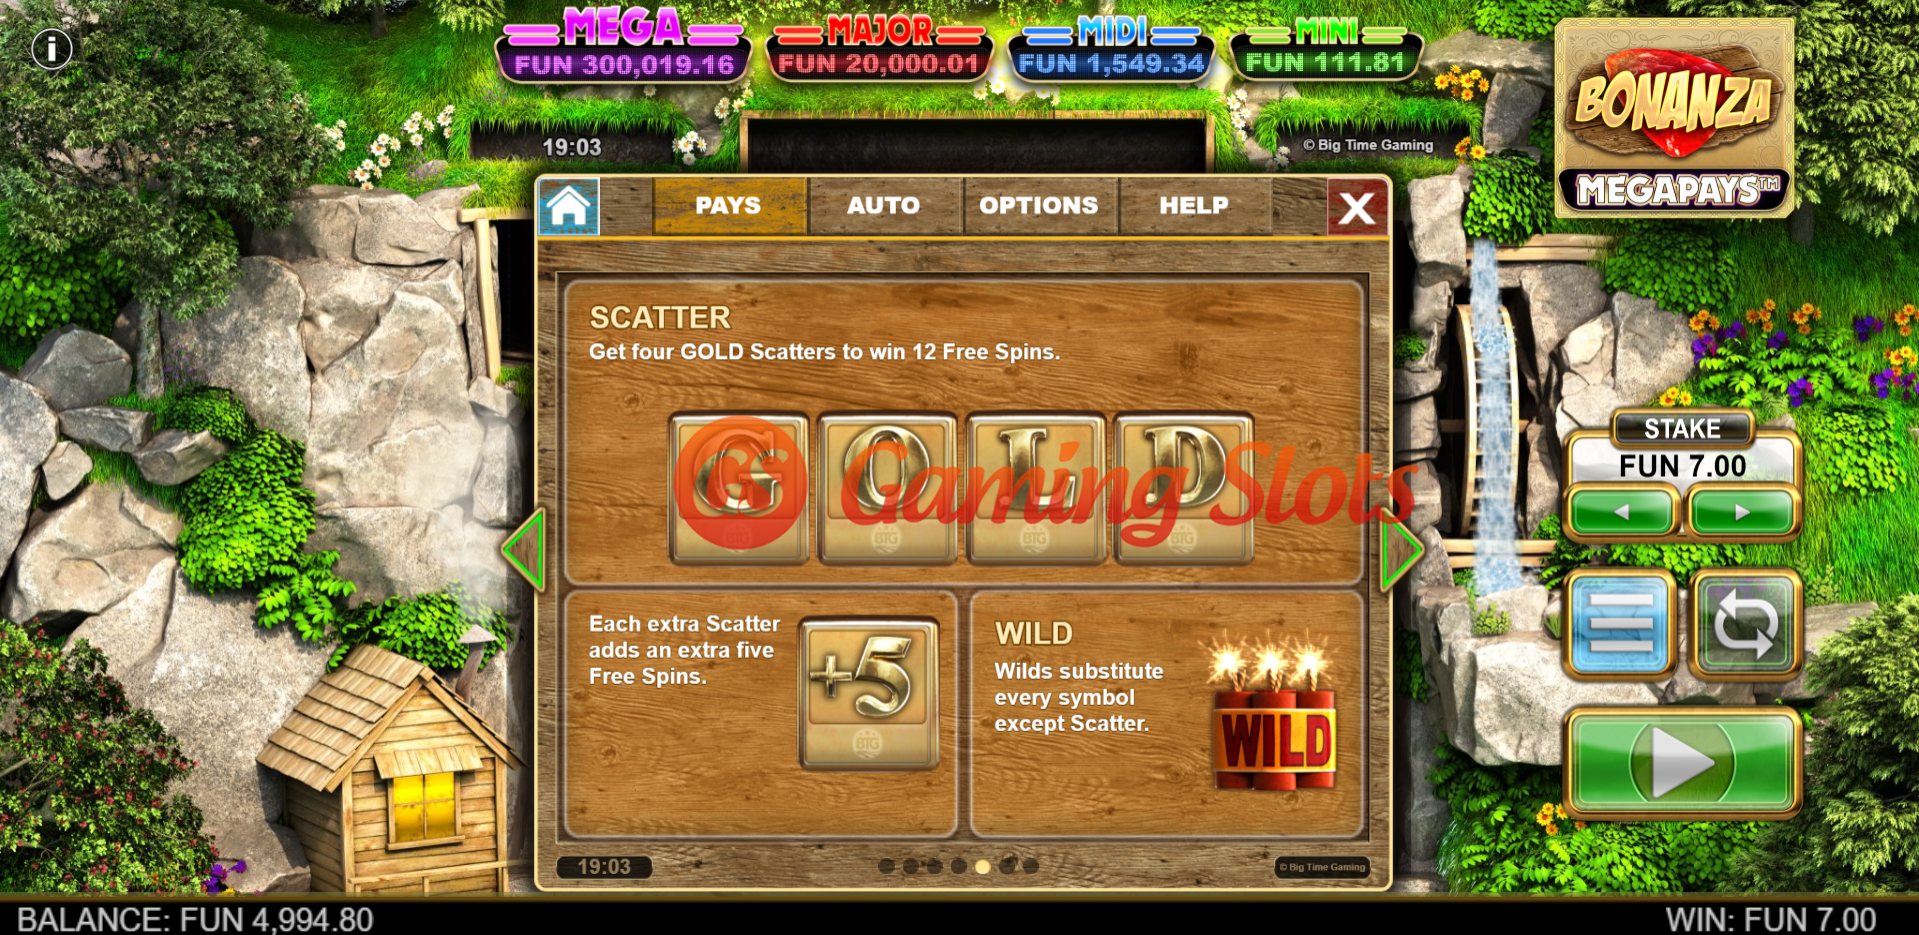 Game Rules for Bonanza Megapays slot from Big Time Gaming